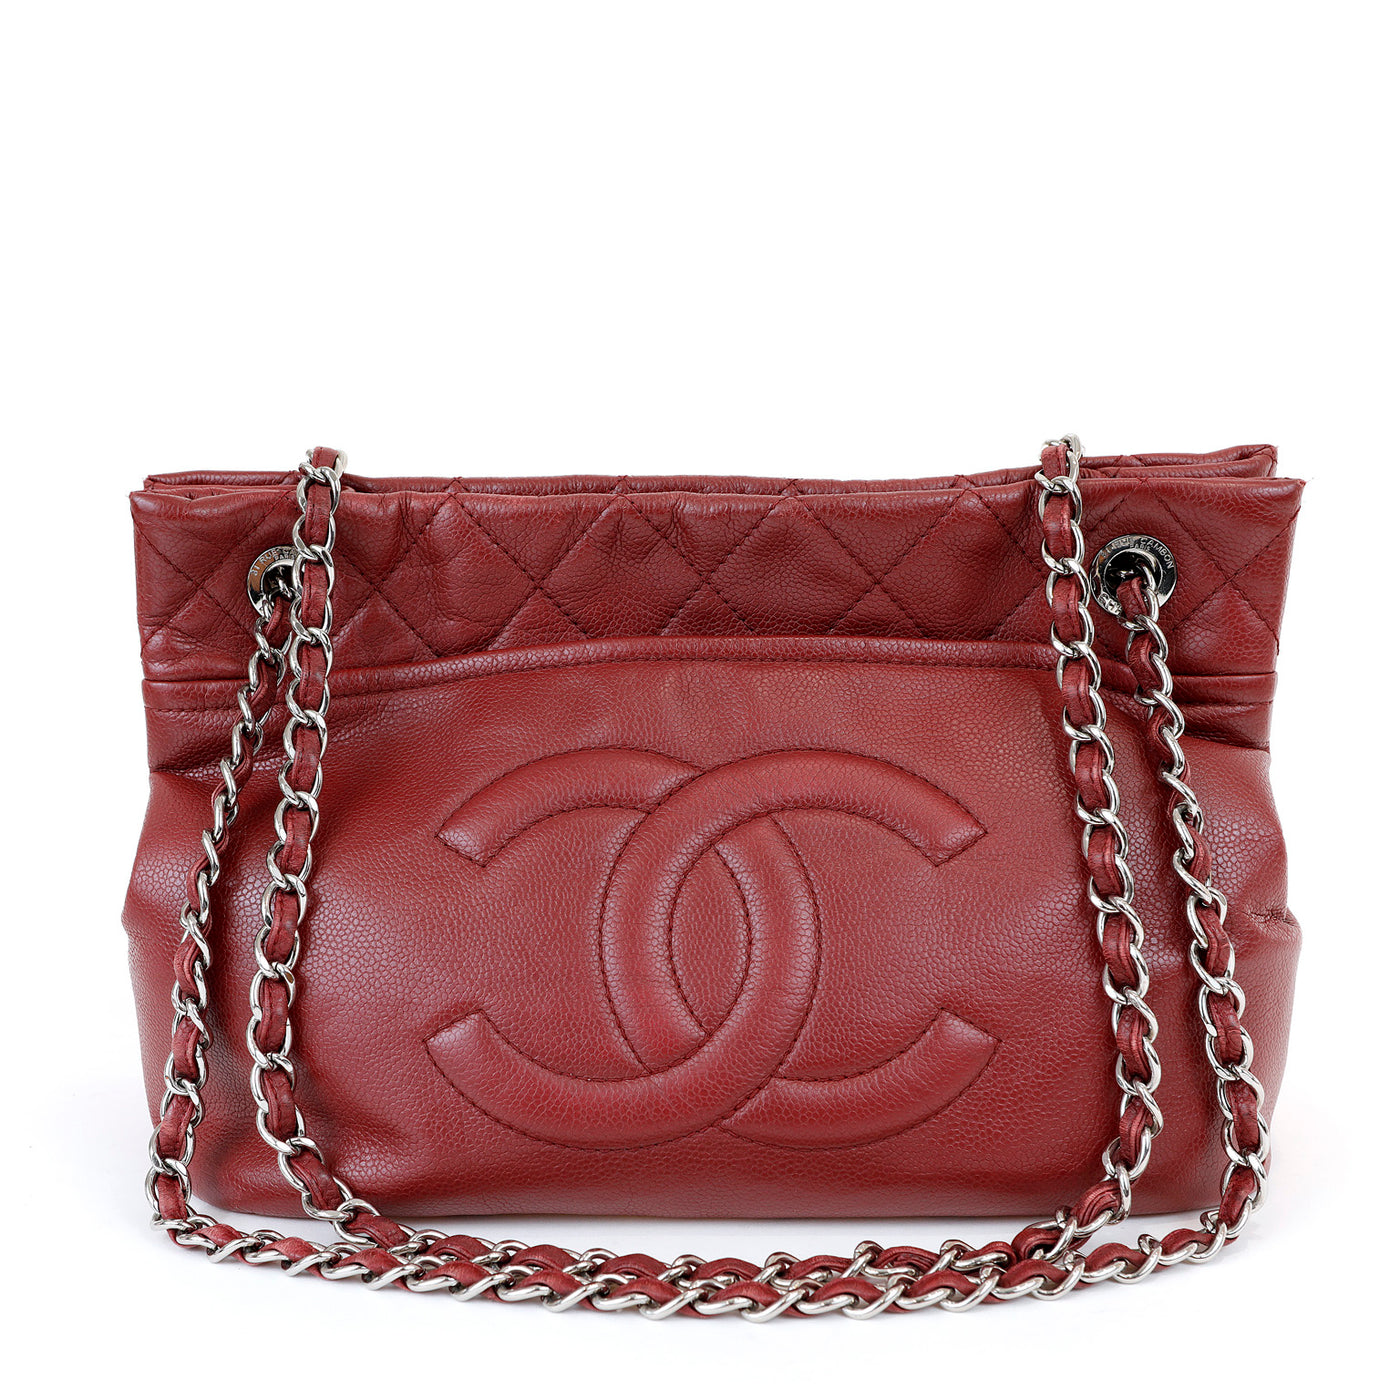 Chanel Red Caviar Leather Tote with Silver Hardware